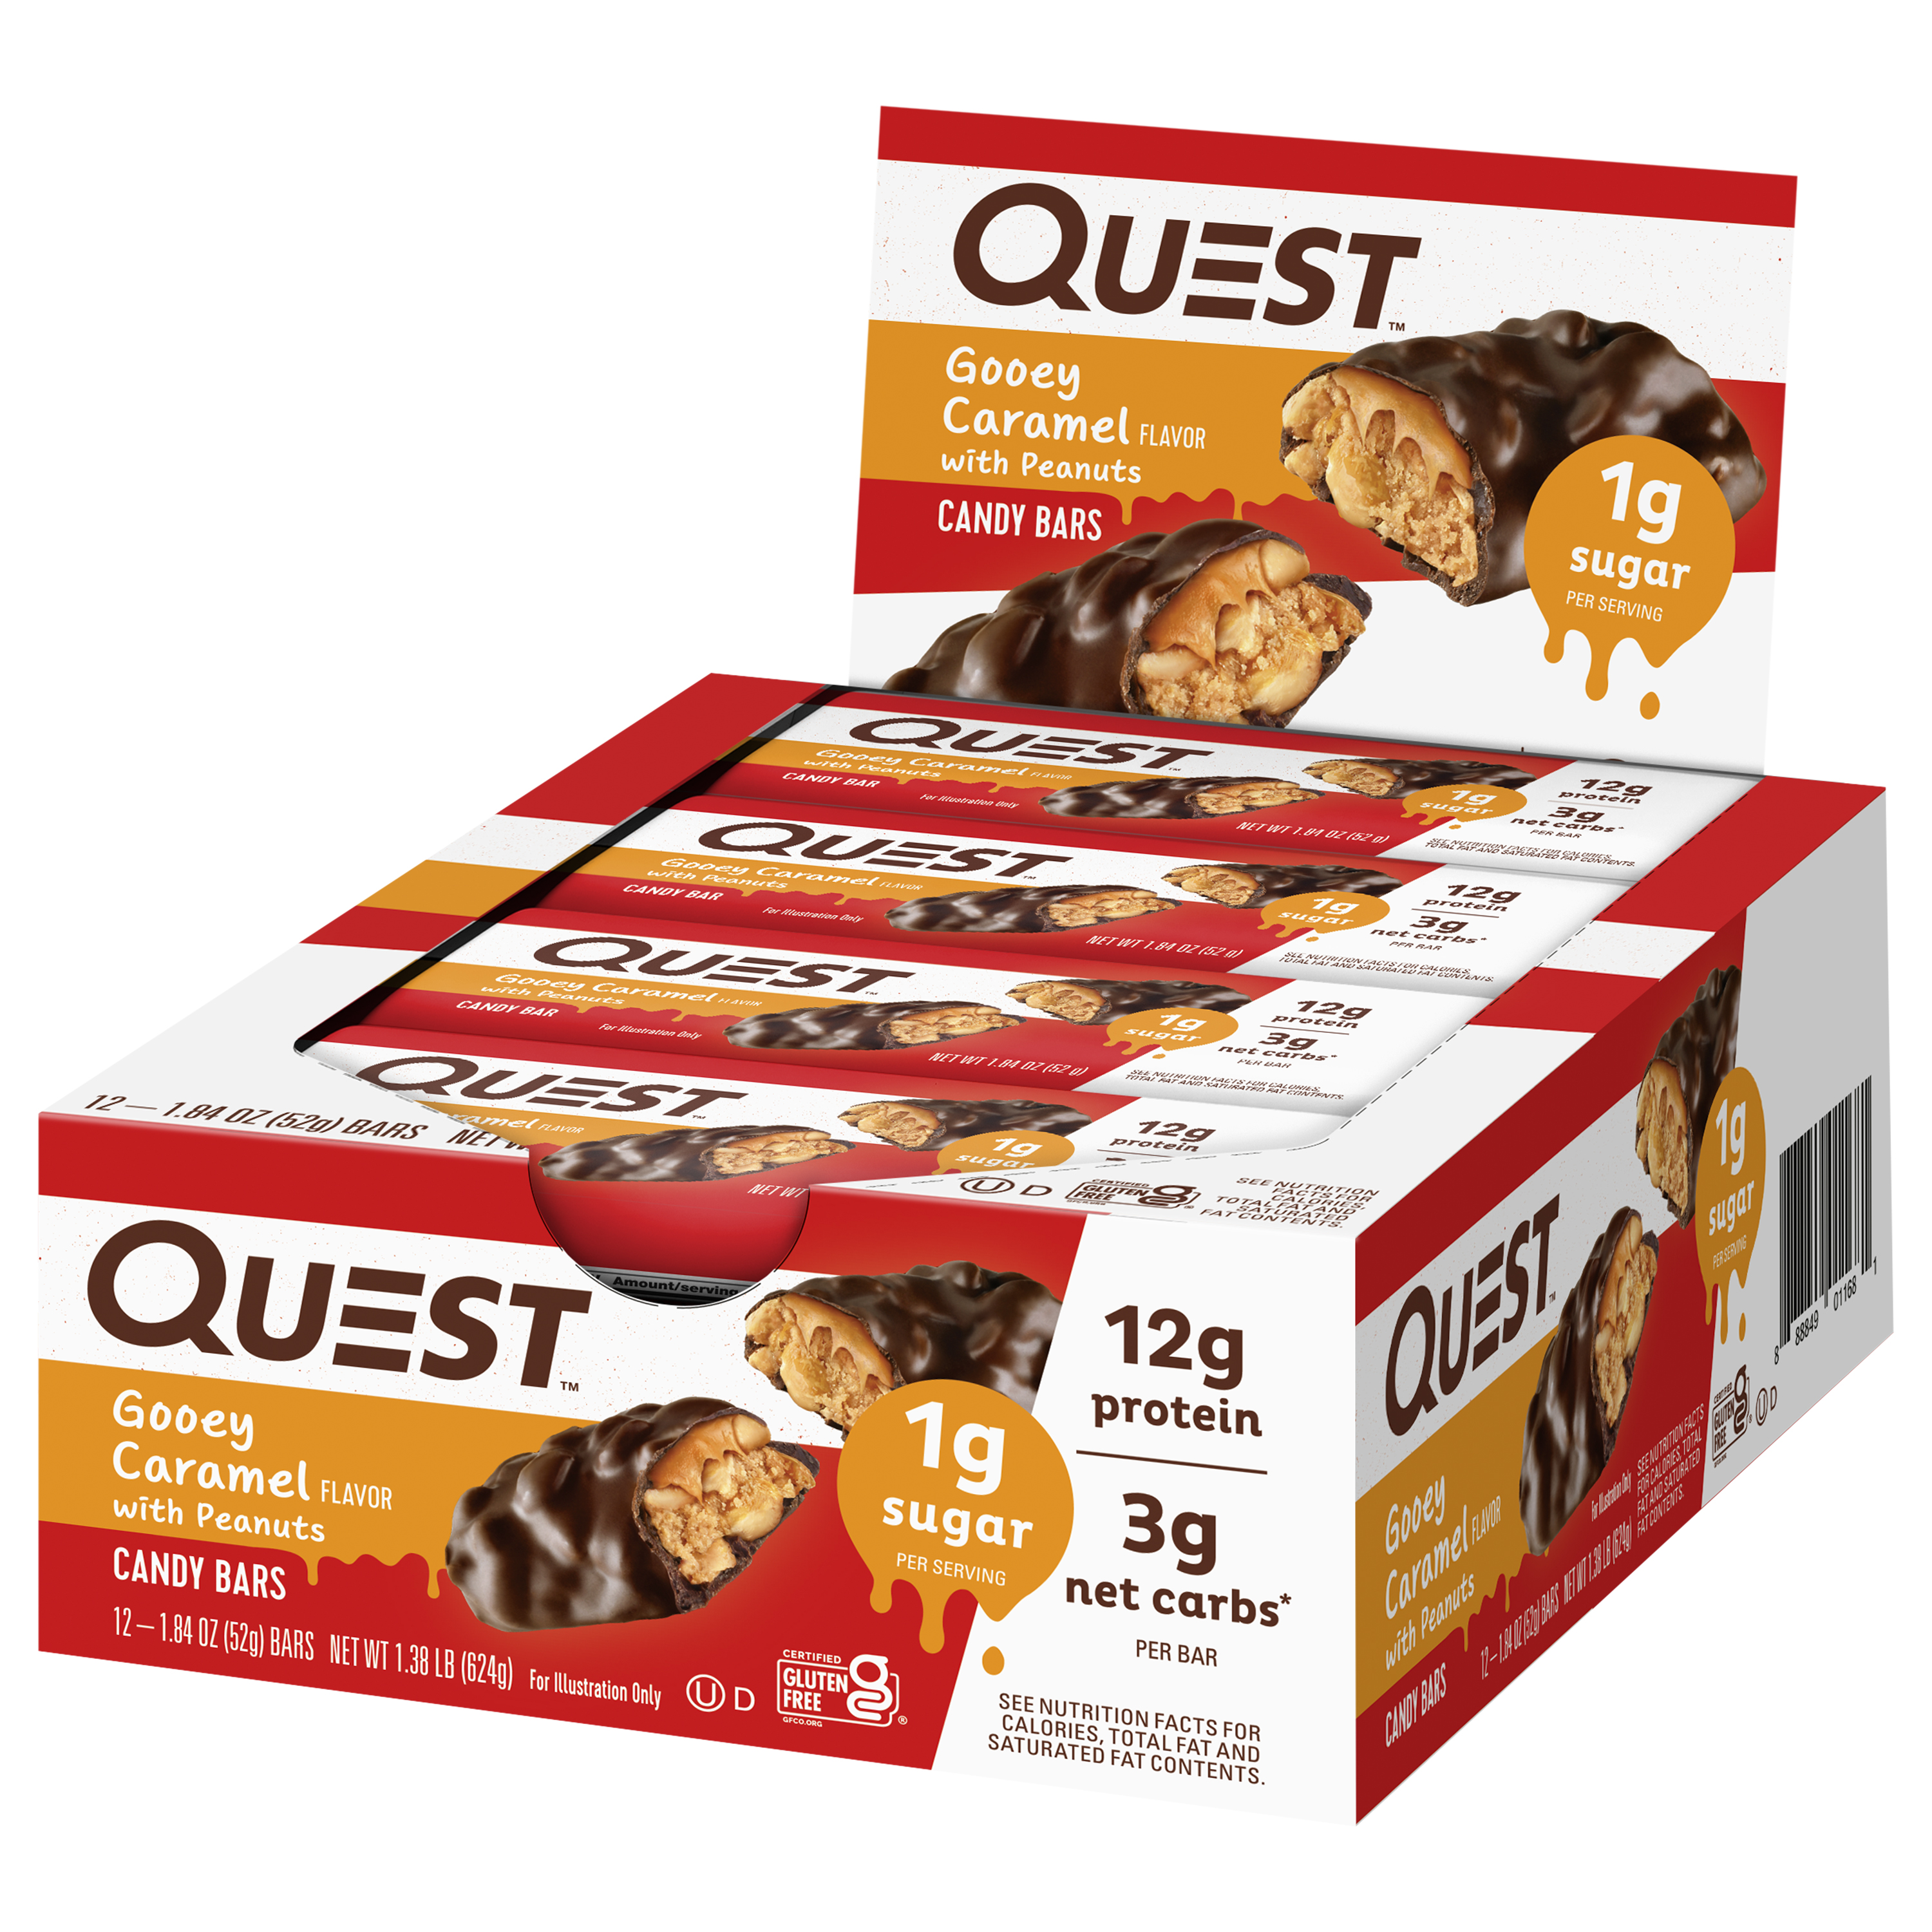 Quest Protein Candy Bar Snacks, Gooey Caramel with Peanuts flavor,  12 Count - image 2 of 11